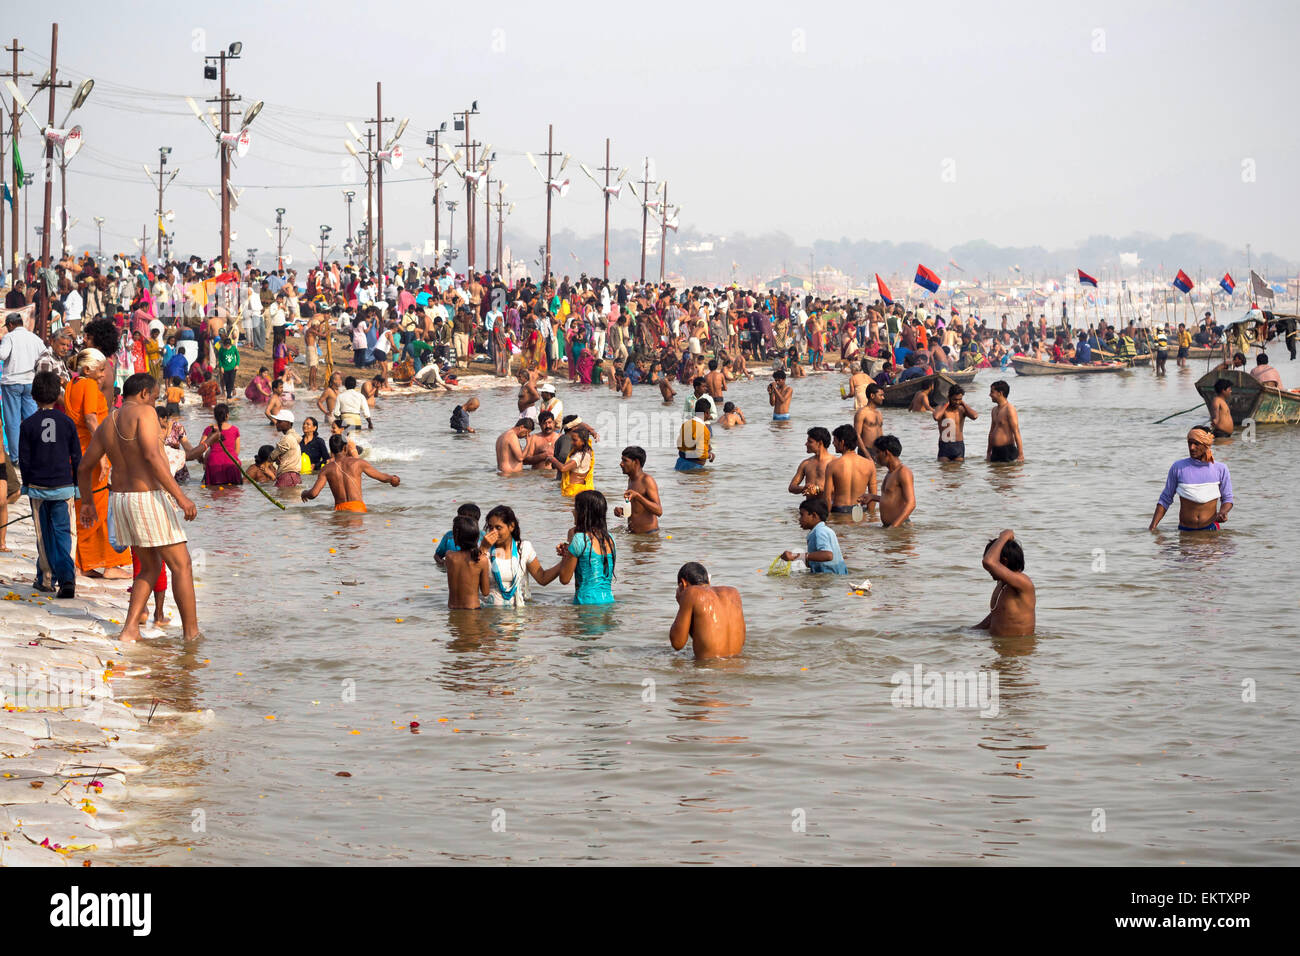 Hindu pilgrims bathing in the Triveni Sangam, the intersection of Stock